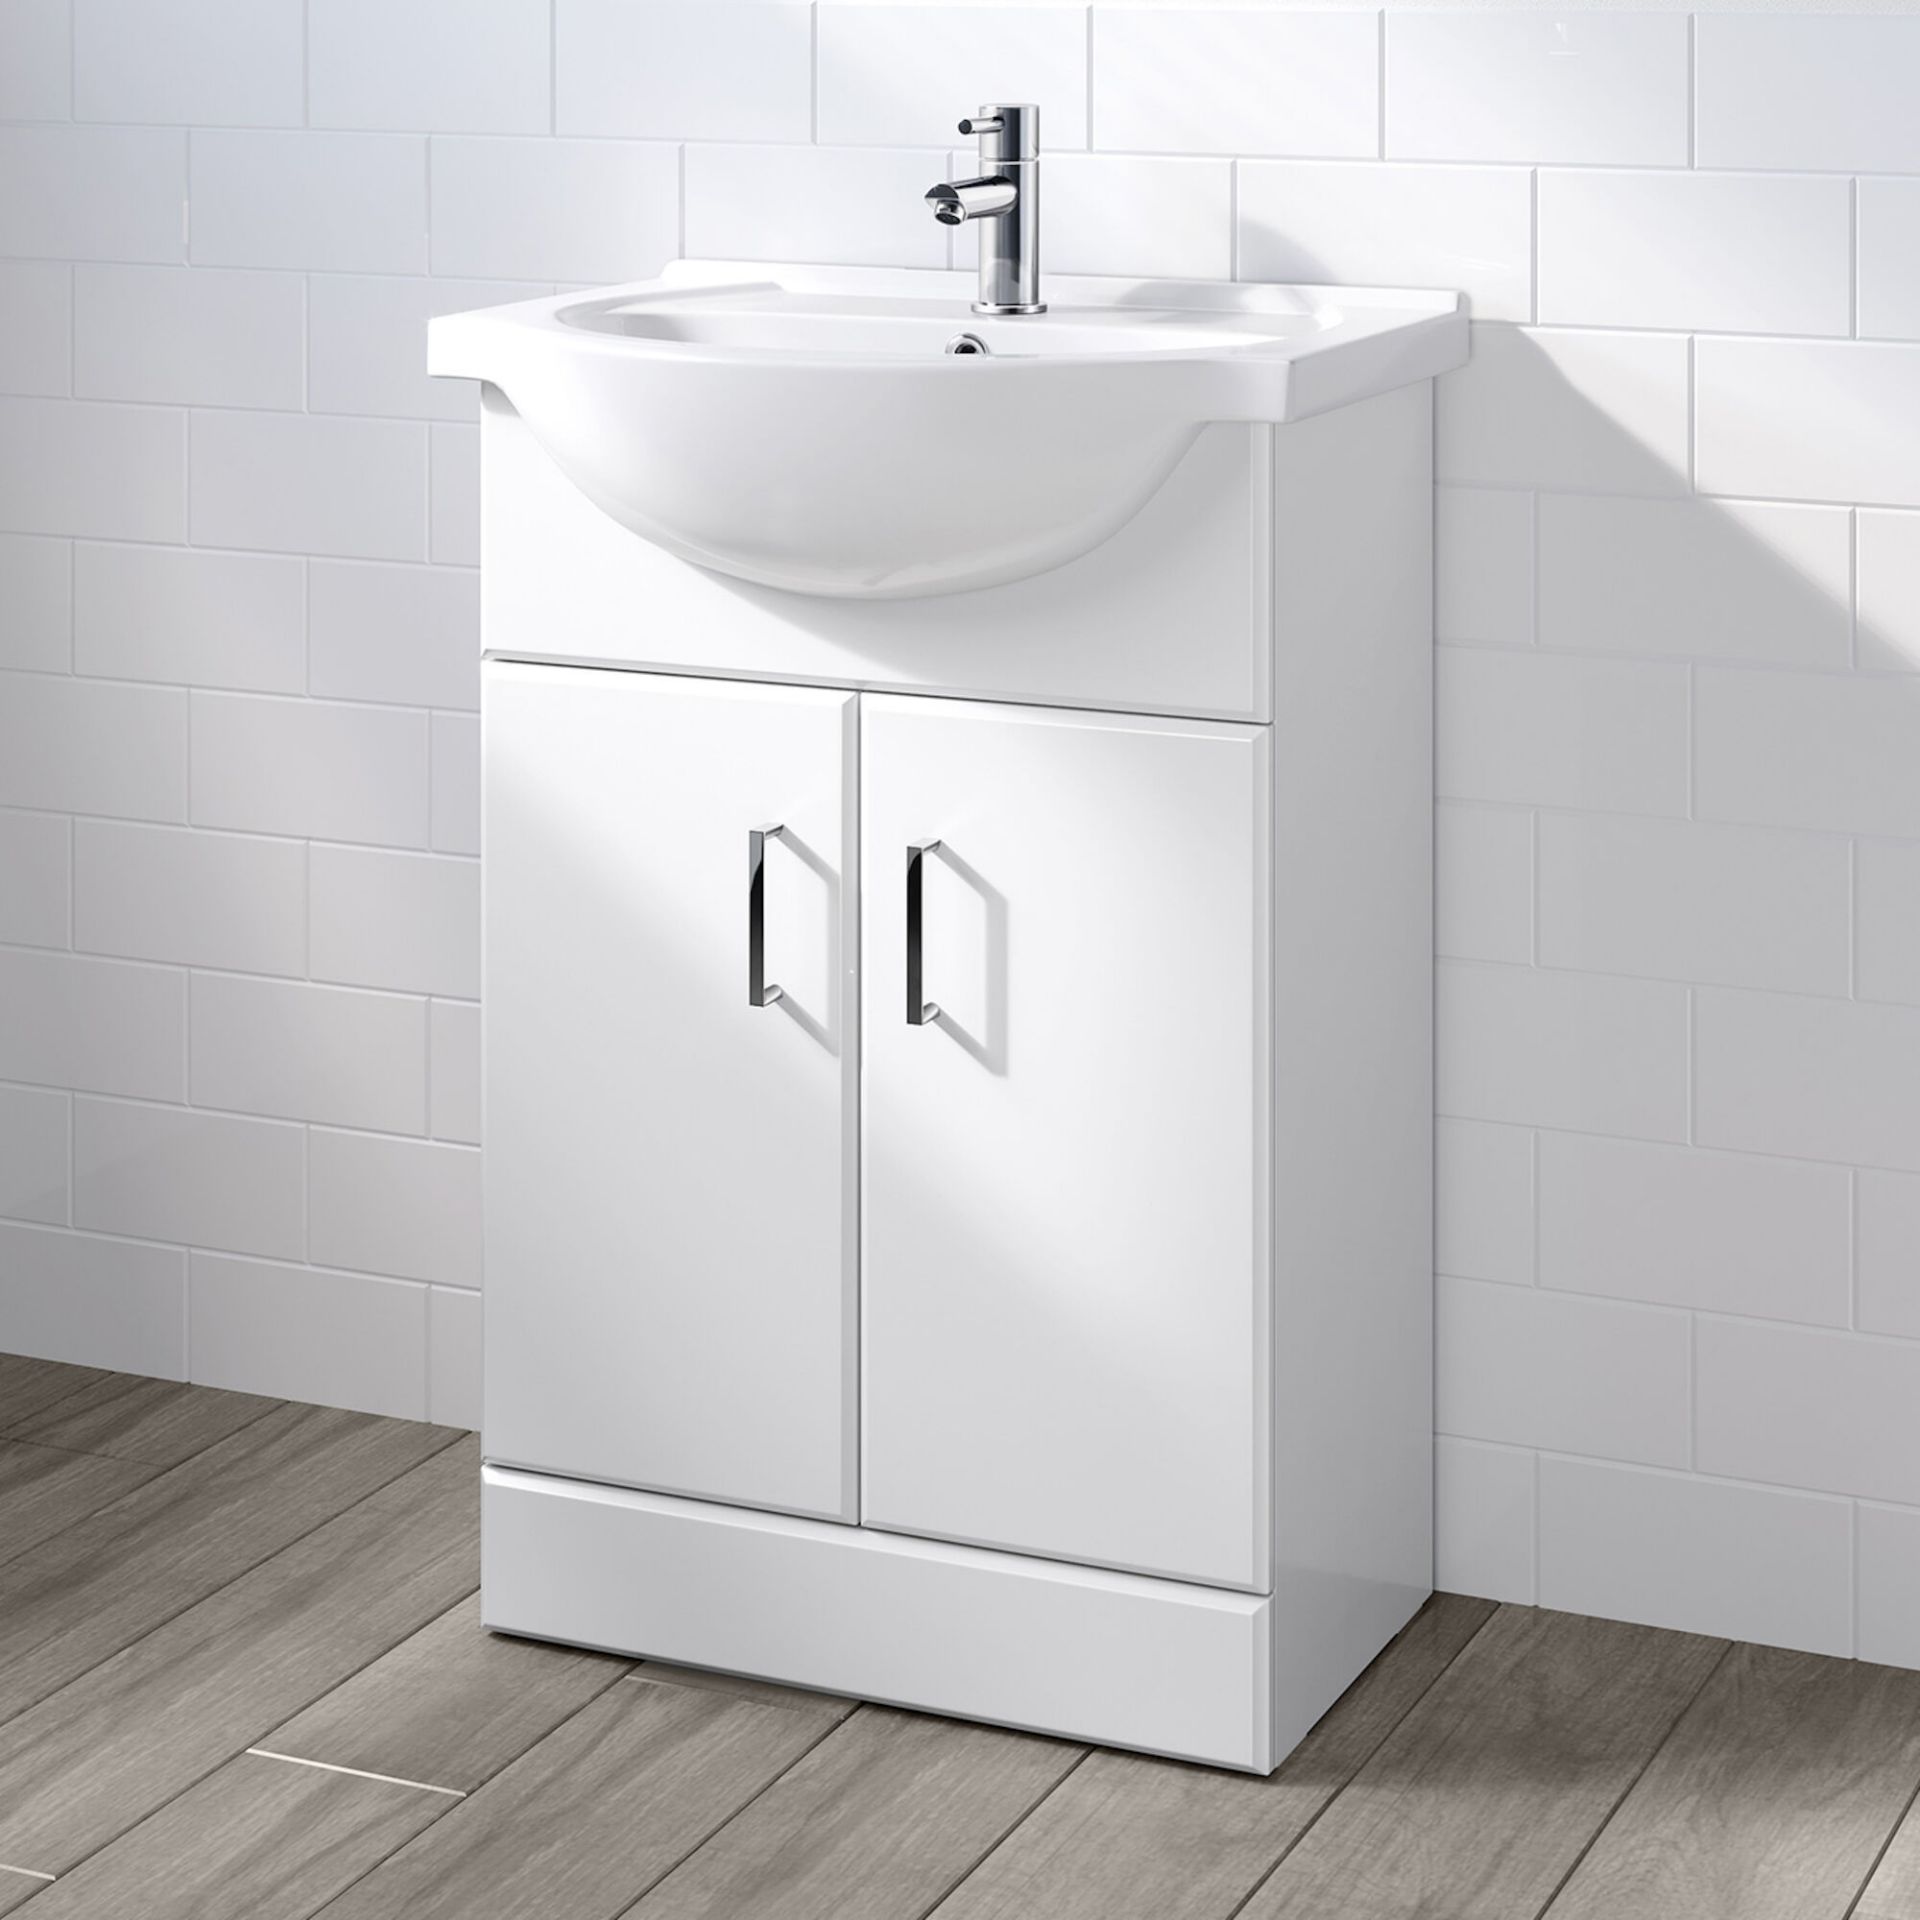 (JF102) 550x300mm Quartz Gloss White Built In Sink Cabinet. RRP £349.99. Comes complete with b...